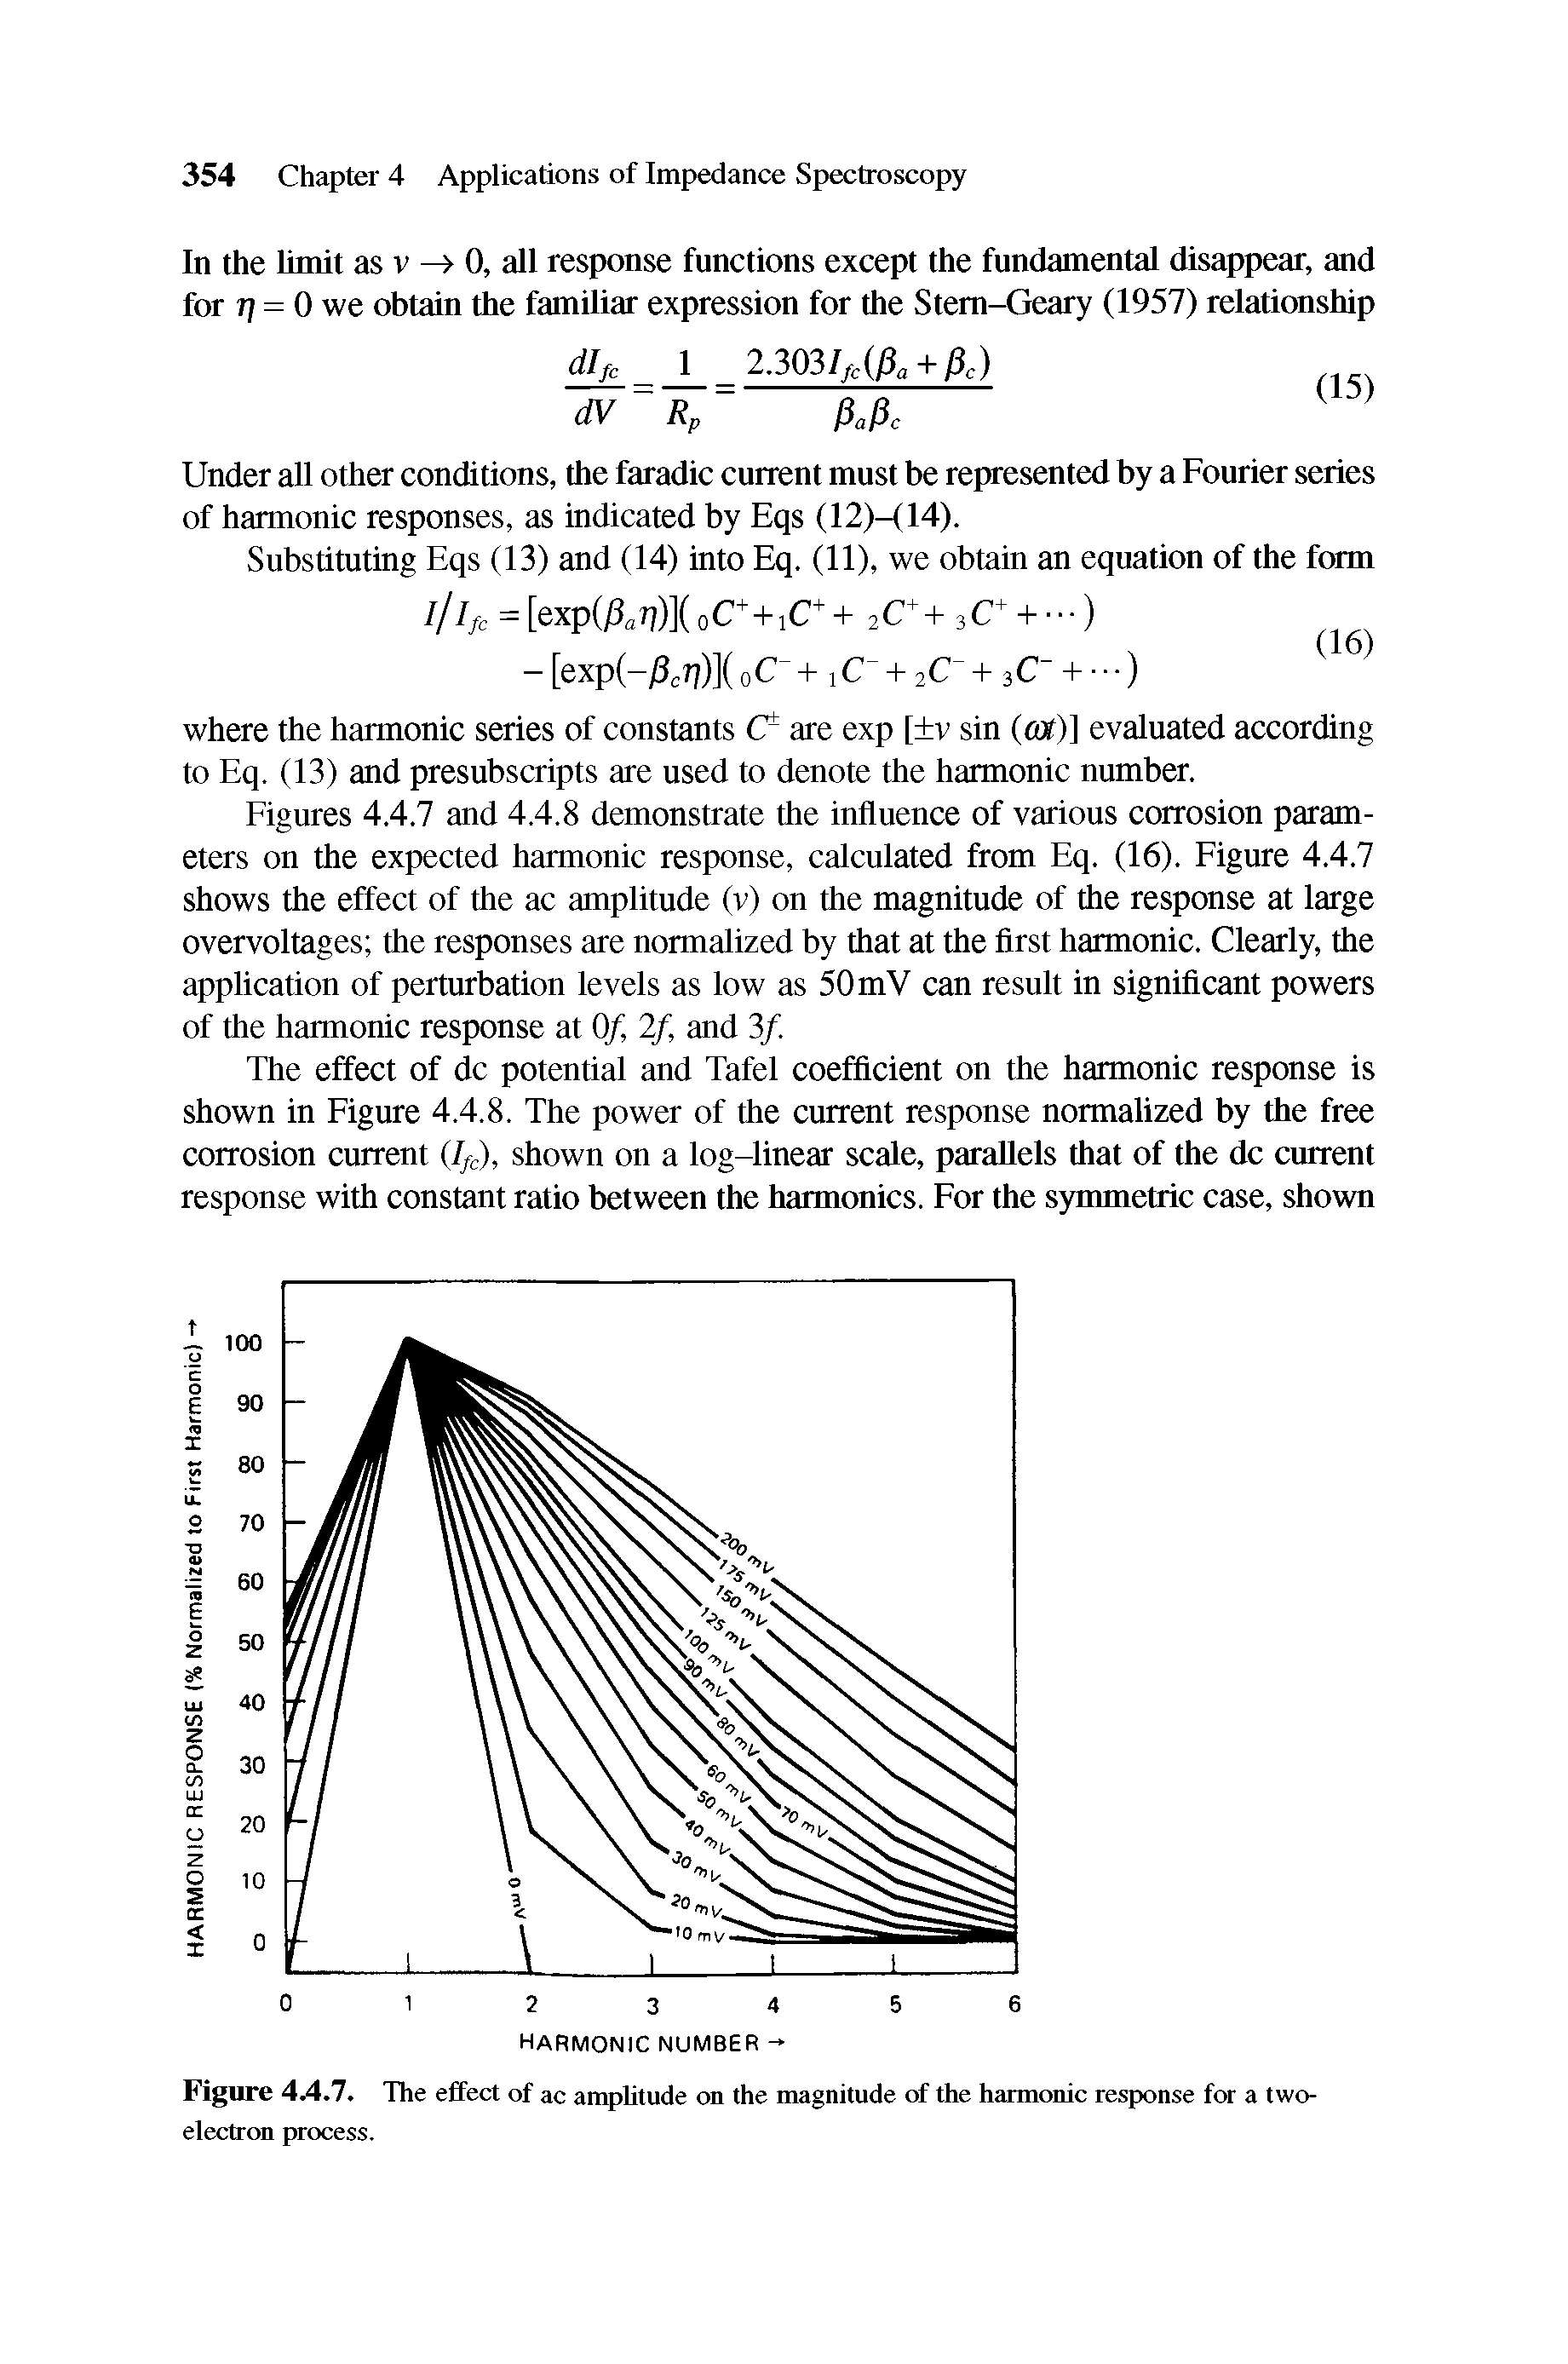 Figures 4.4.7 and 4.4.8 demonstrate the influence of various corrosion parameters on the expected harmonic response, calculated from Eq. (16). Figure 4.4.7 shows the effect of the ac amplitude (v) on the magnitude of the response at large overvoltages the responses are normalized by that at the first harmonic. Clearly, the application of perturbation levels as low as 50 mV can result in significant powers of the harmonic response at Of, 2f and 3/.